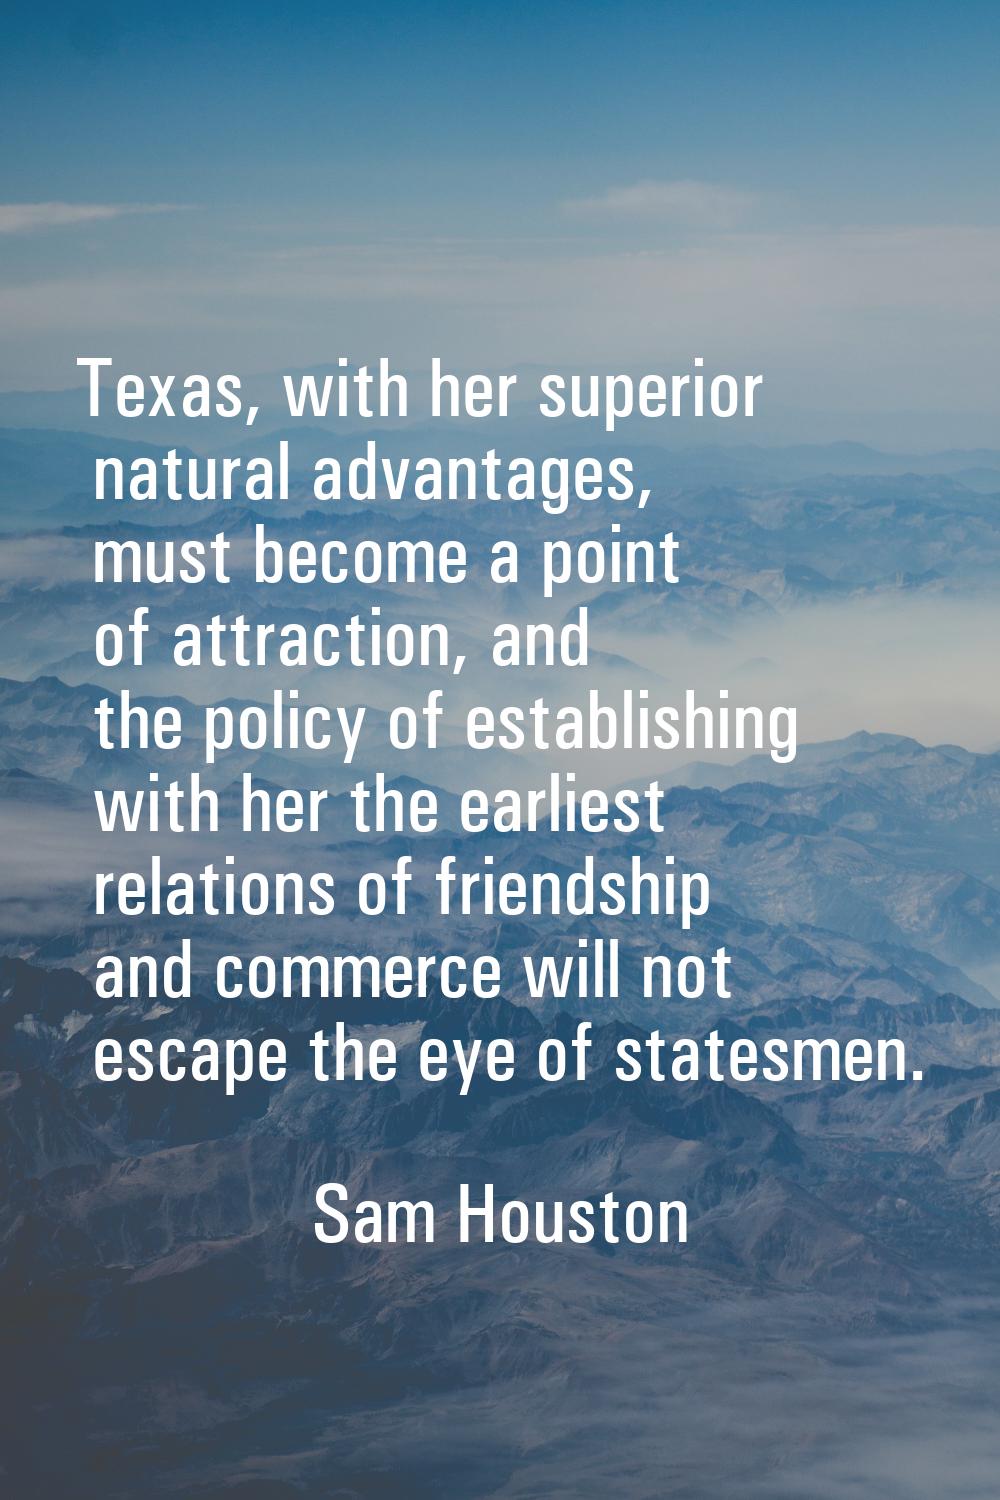 Texas, with her superior natural advantages, must become a point of attraction, and the policy of e